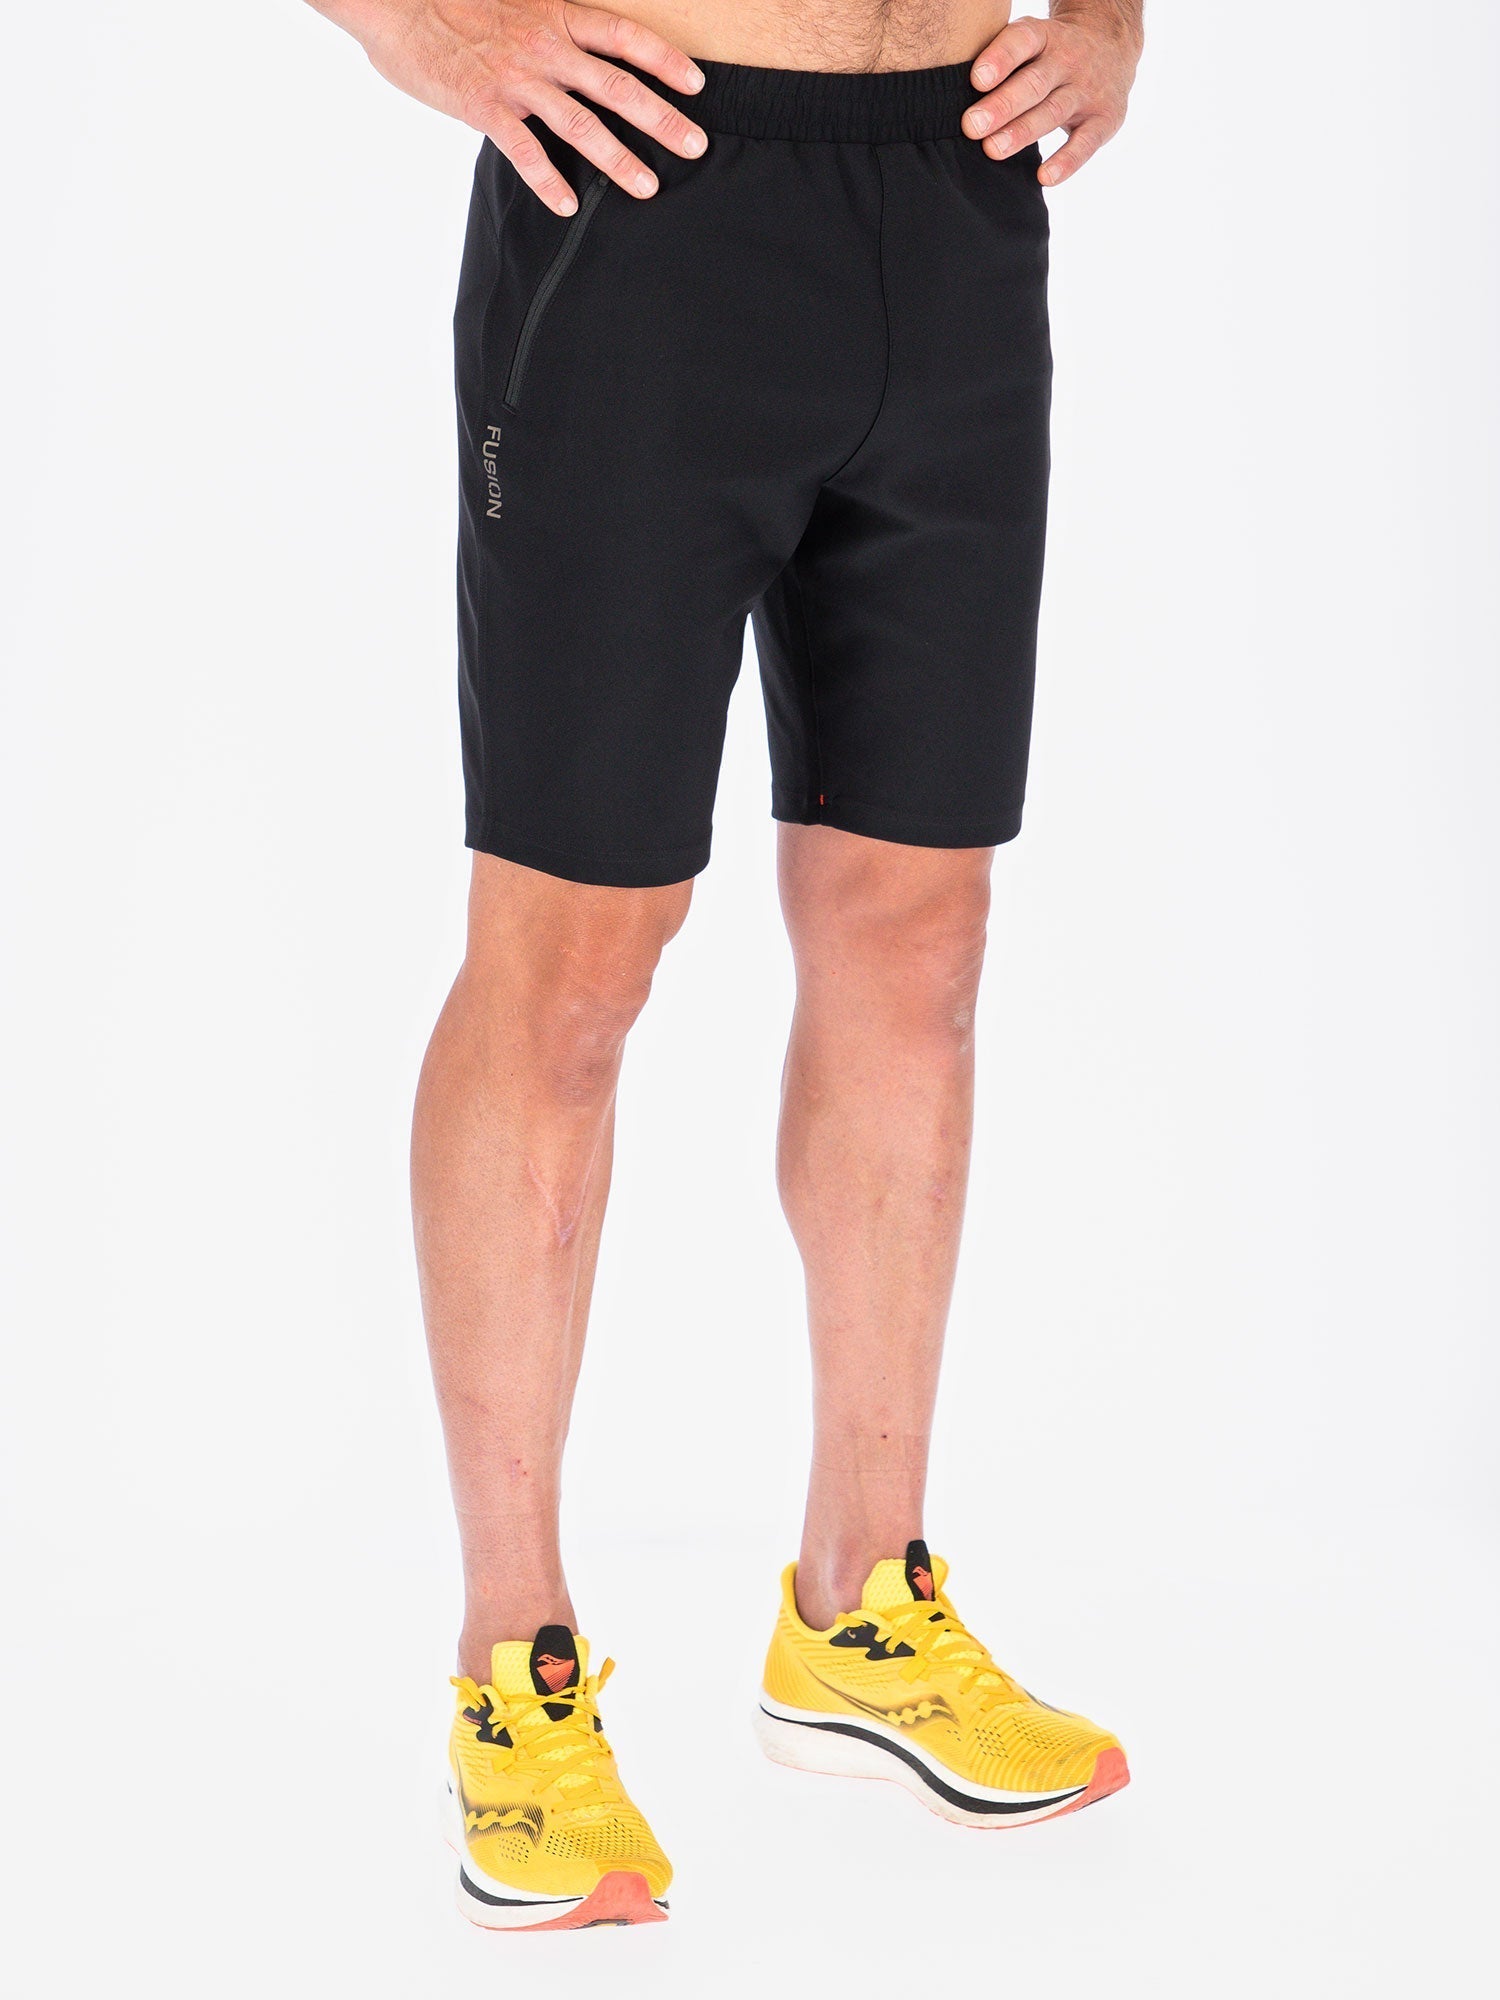 Squeezy Mens Training Shorts